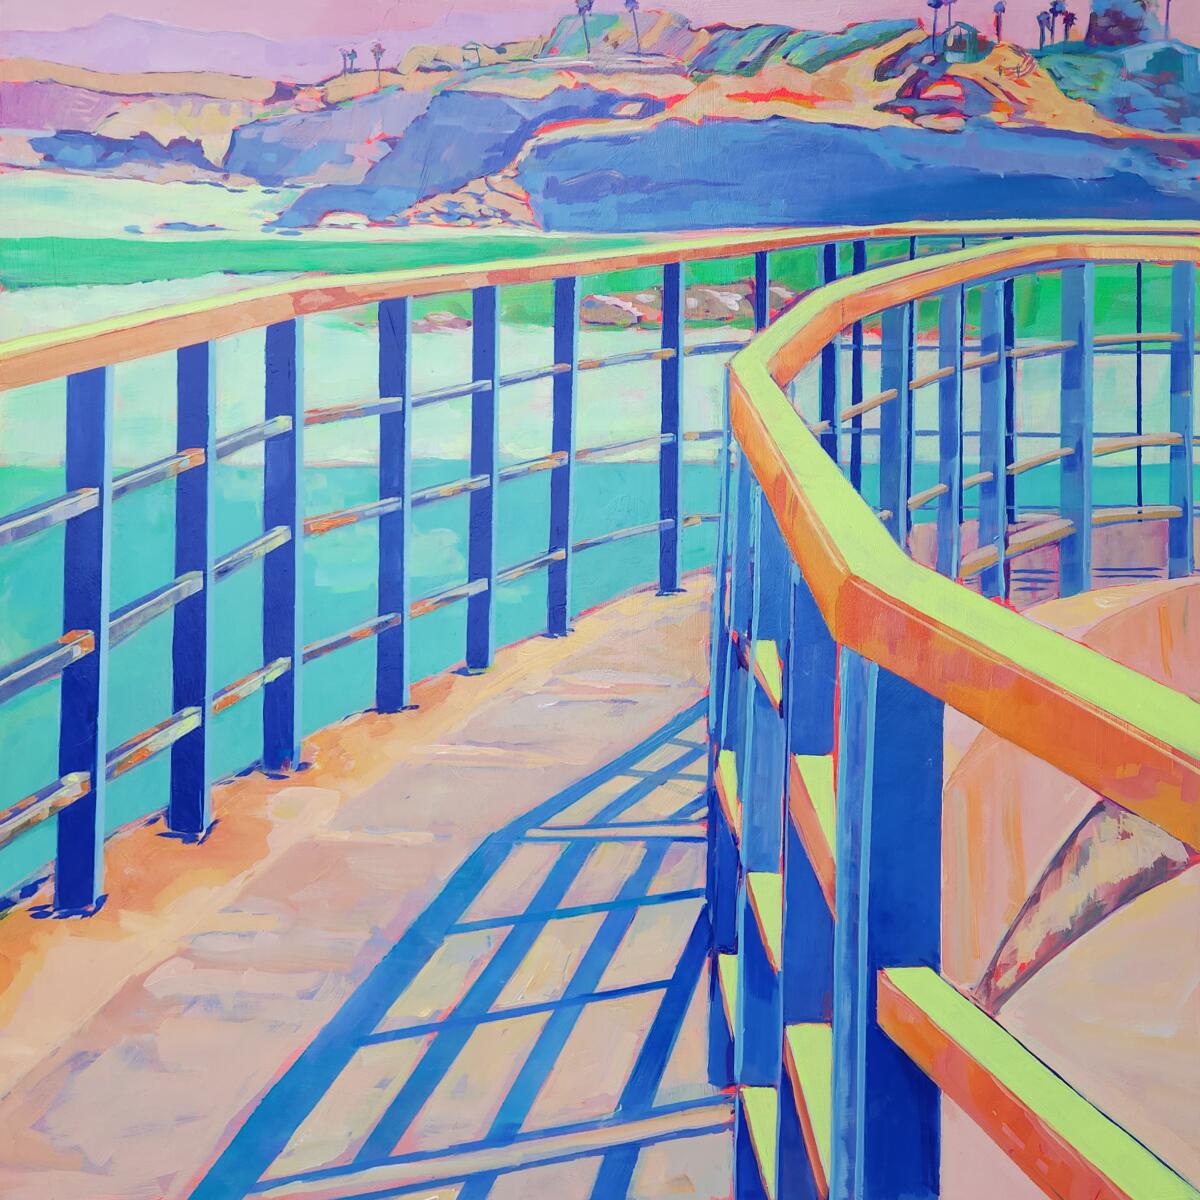 Kate Joiner's "Children's Pool" is among the works in the La Jolla Library Art Gallery's exhibit “California Color.”